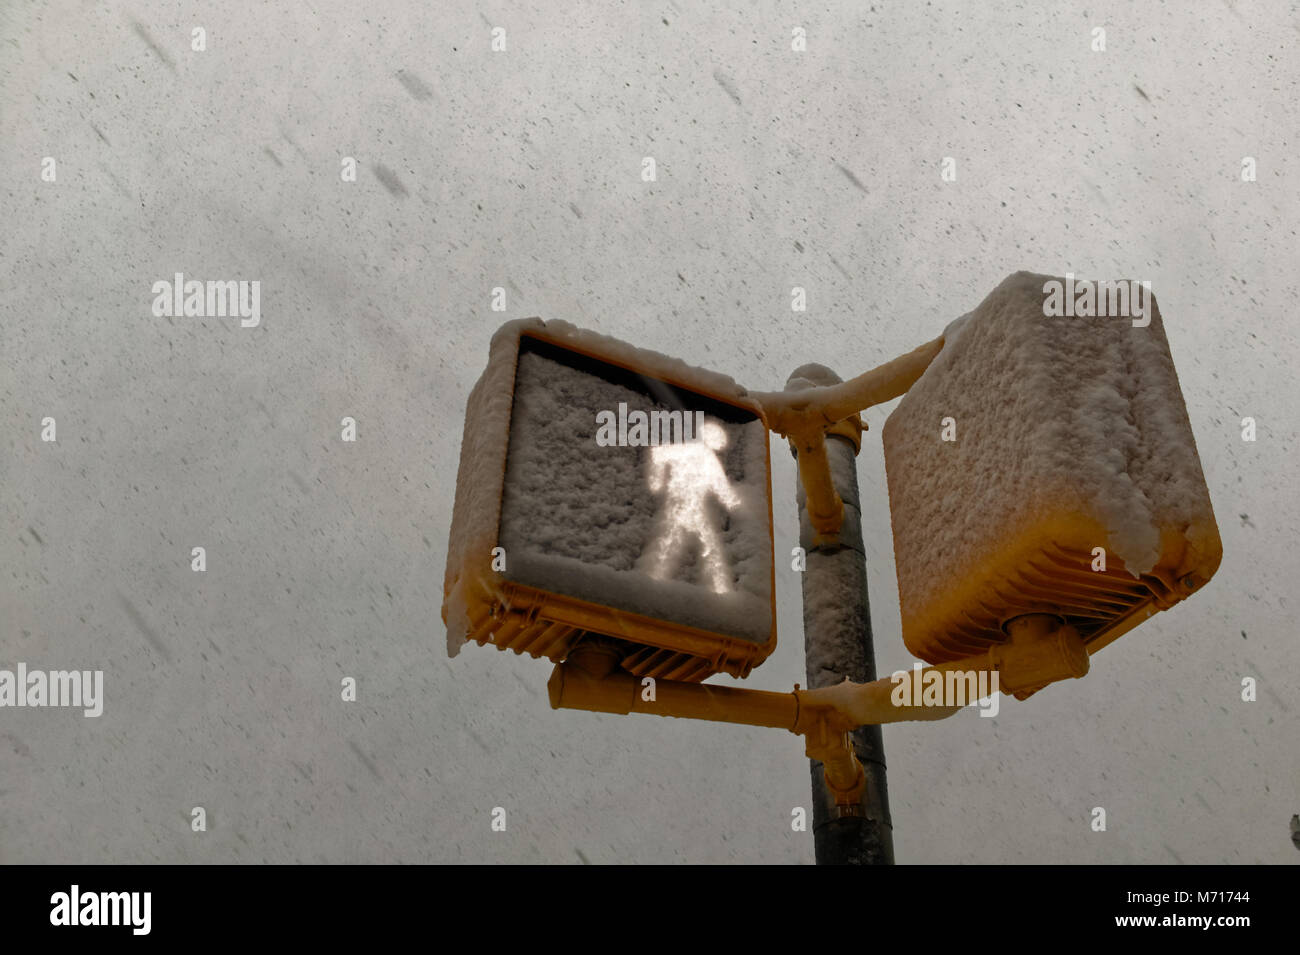 Brooklyn, USA. 7th March, 2018. Crossing signal covered in snow during the Nor'easter of March 7th, 2018 in Brooklyn New York. Credit: OneDayOneImage/Alamy Live News Stock Photo